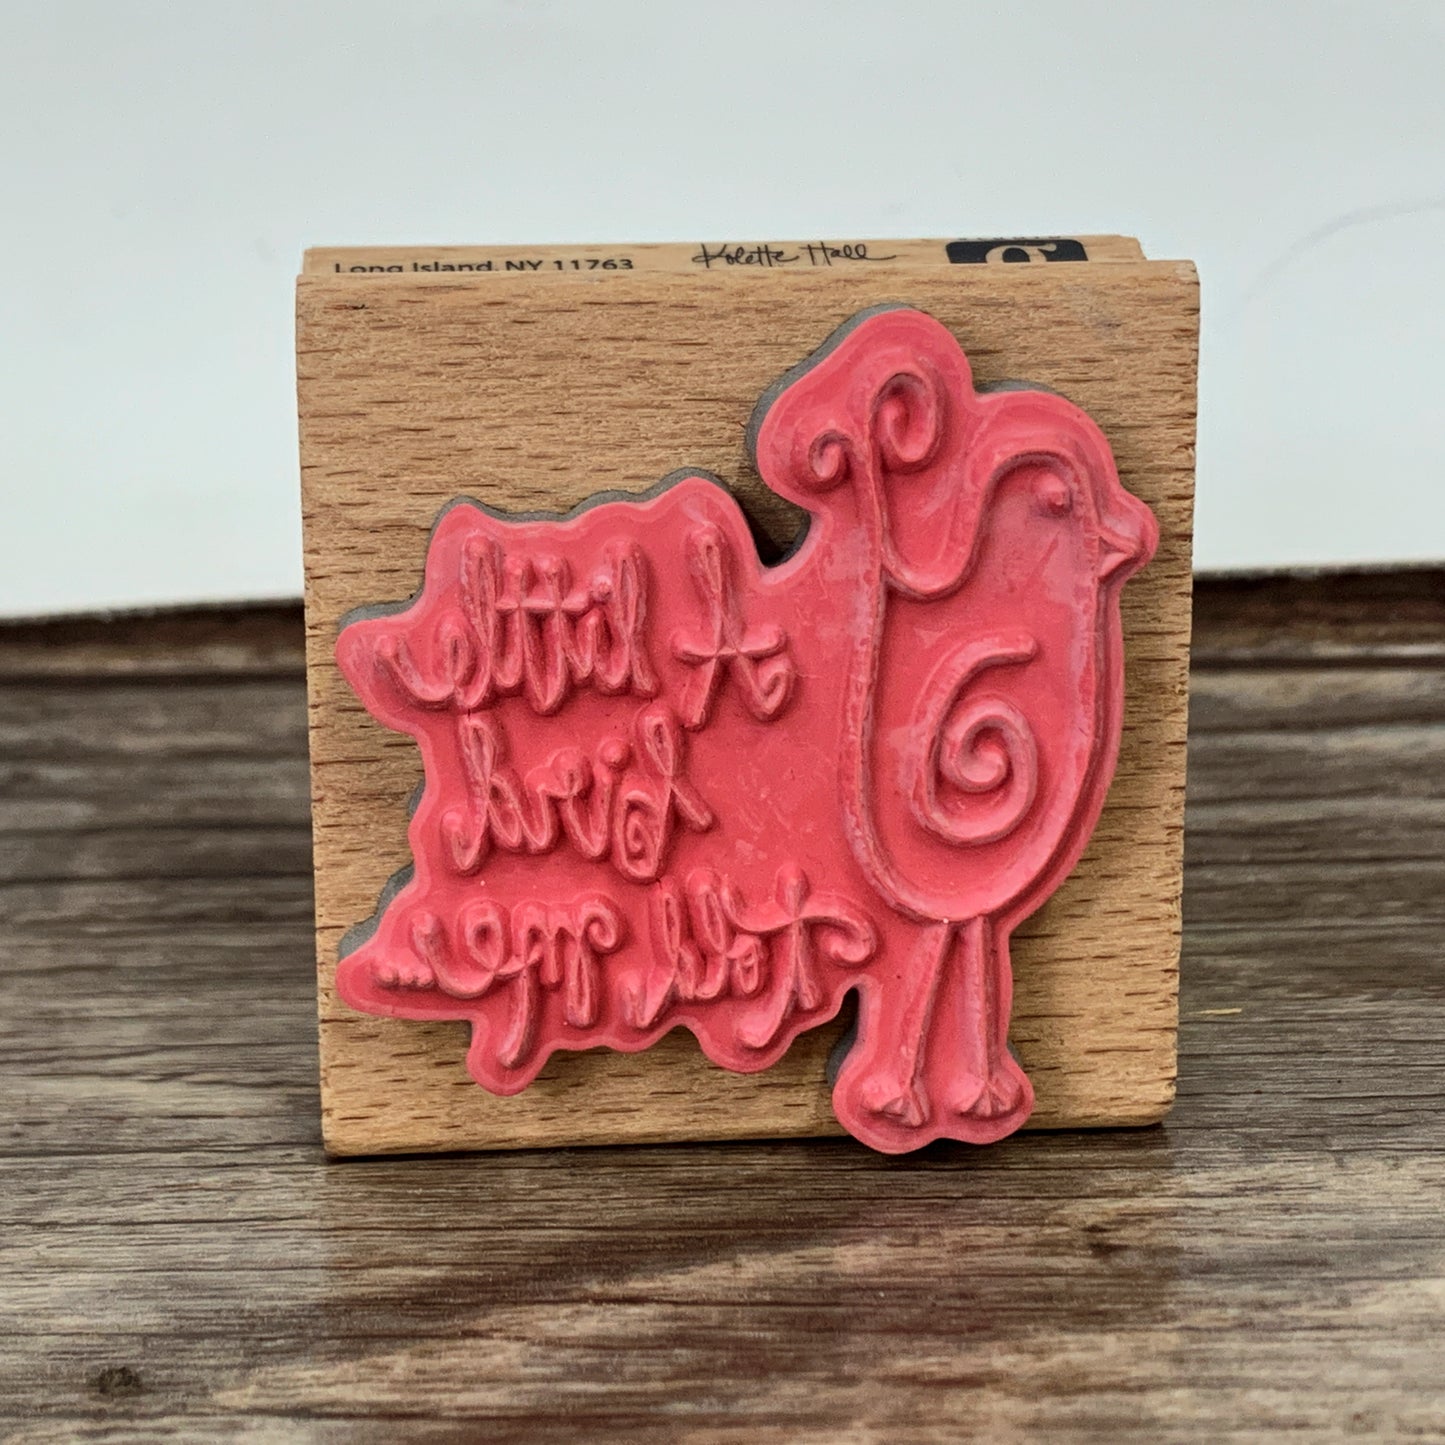 A Little Bird Told Me Studio G Wood Mounted Rubber Stamp